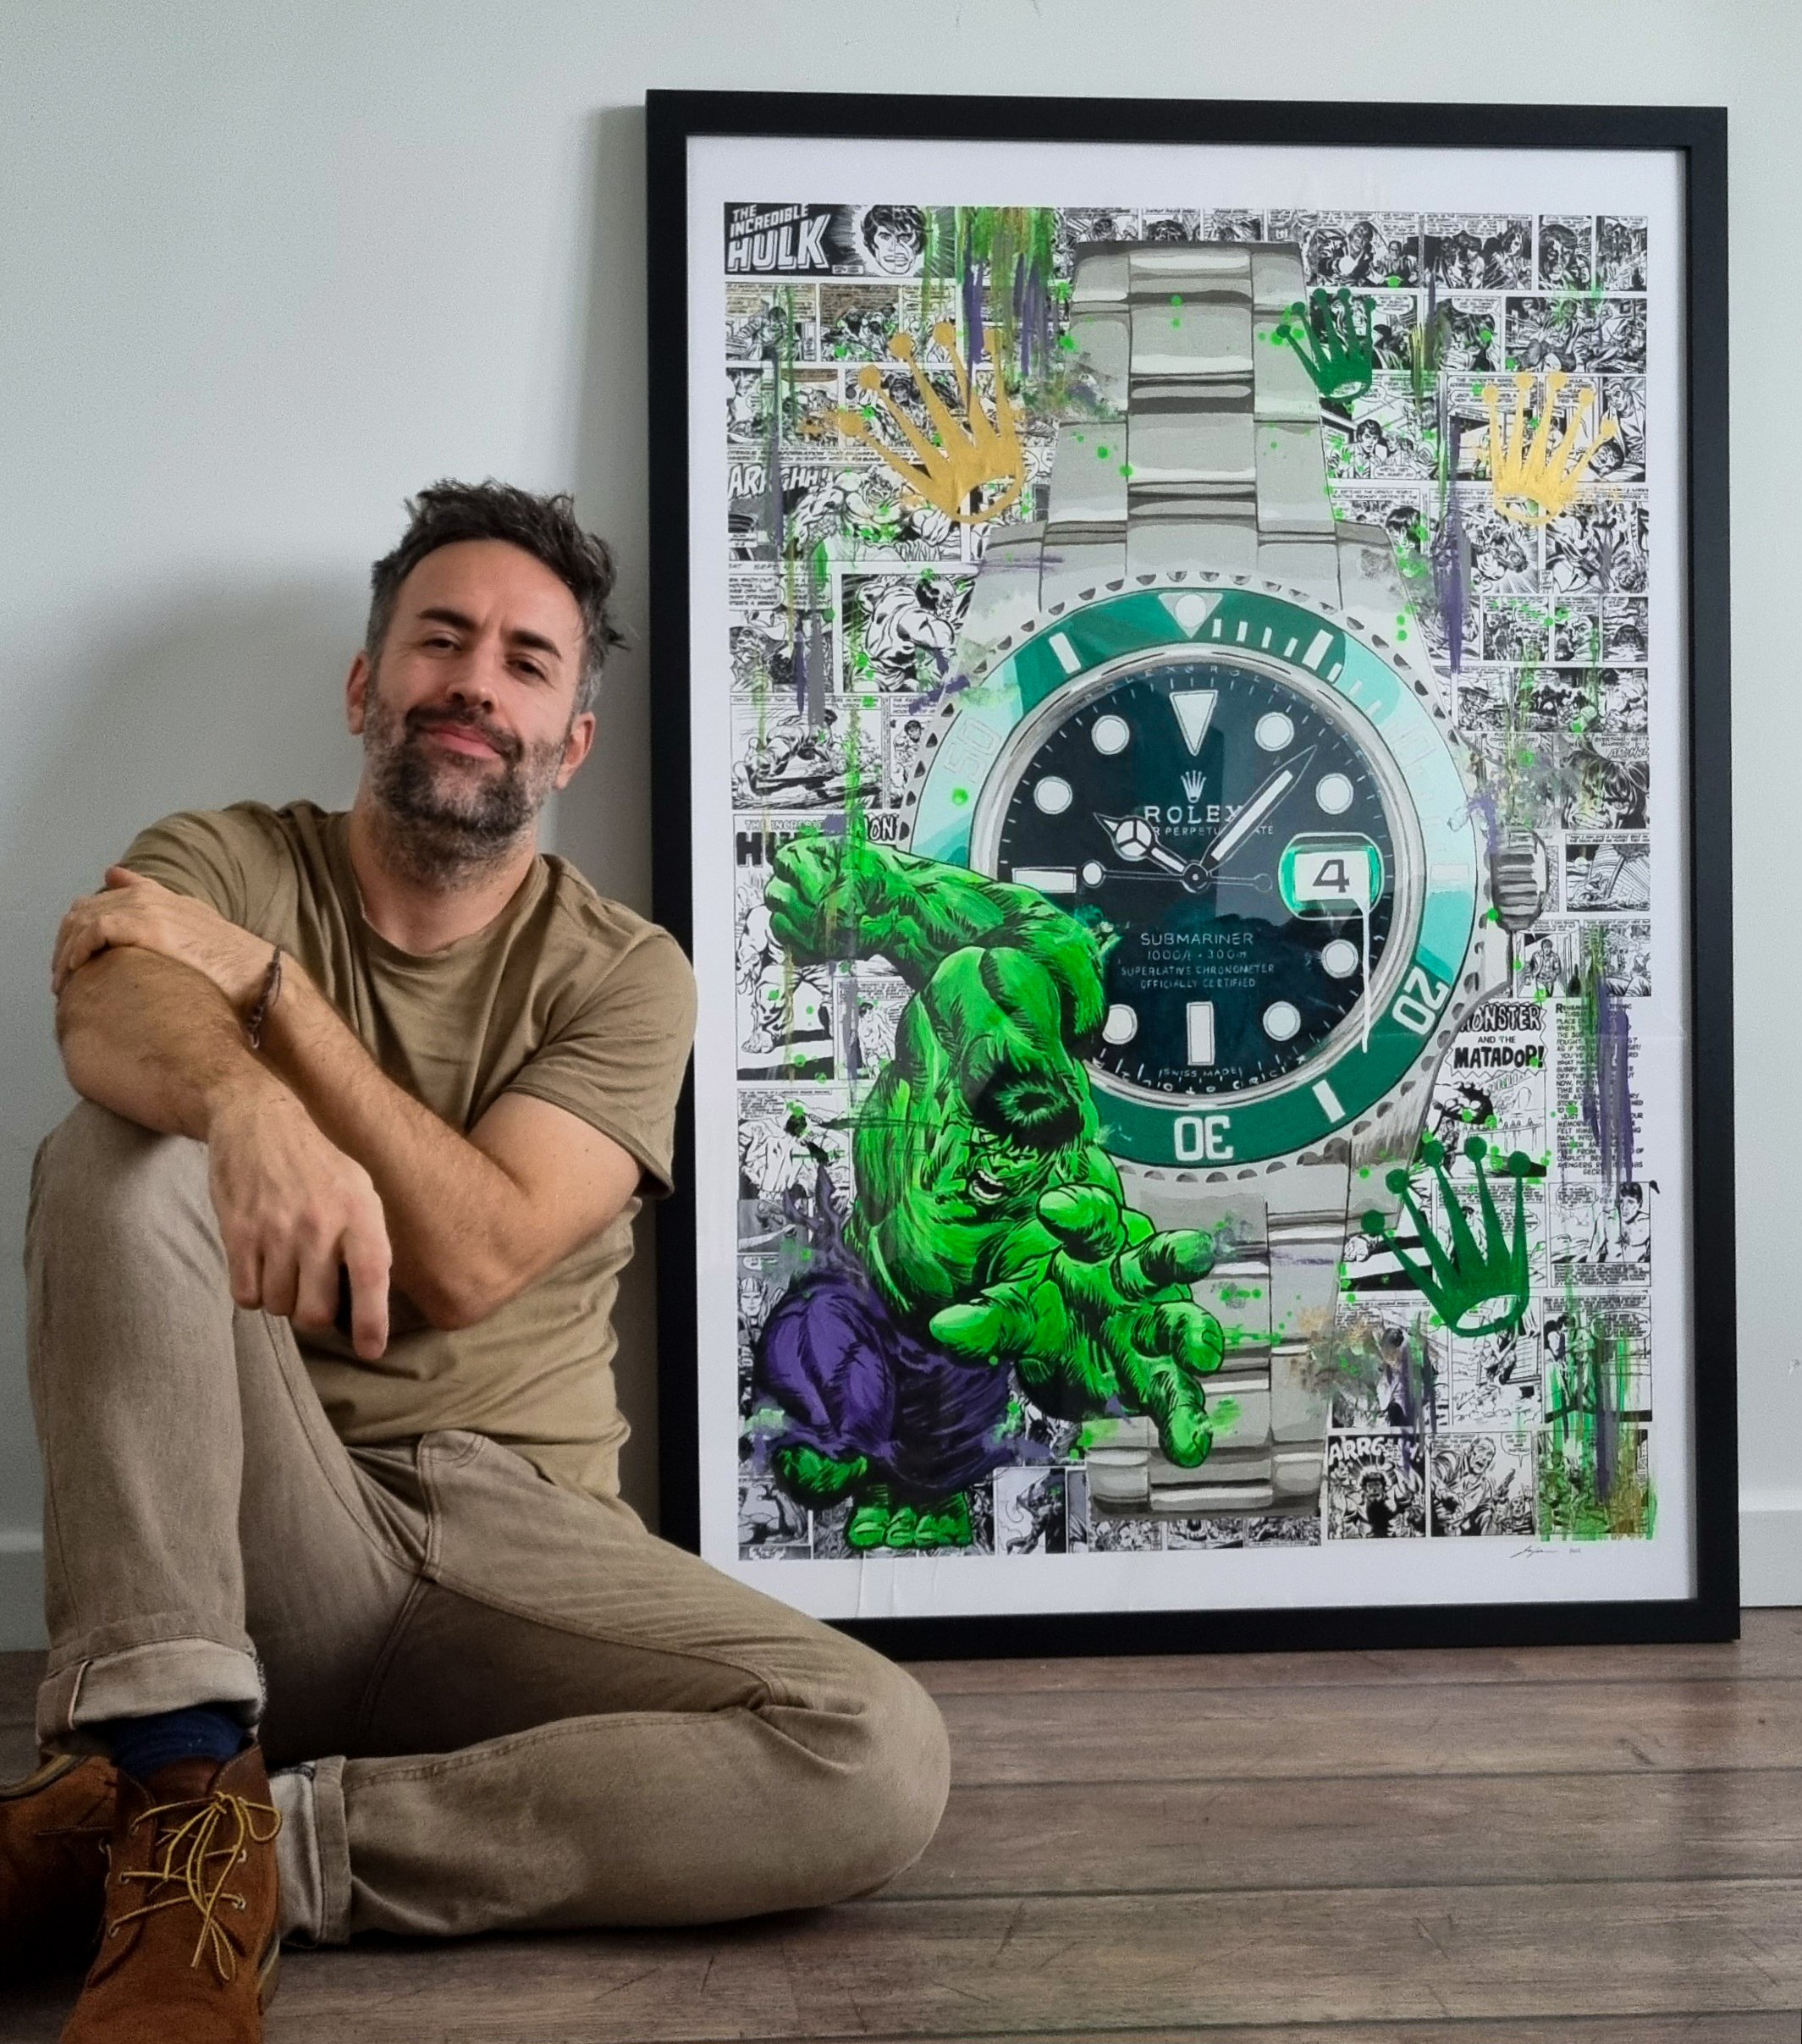 Ian Salmon Art - Rolex Watch Incredible Hulk Painting - Limited Edition print - Pop Wall Artwork Poster gift decor gifts - Framed 1.jpg